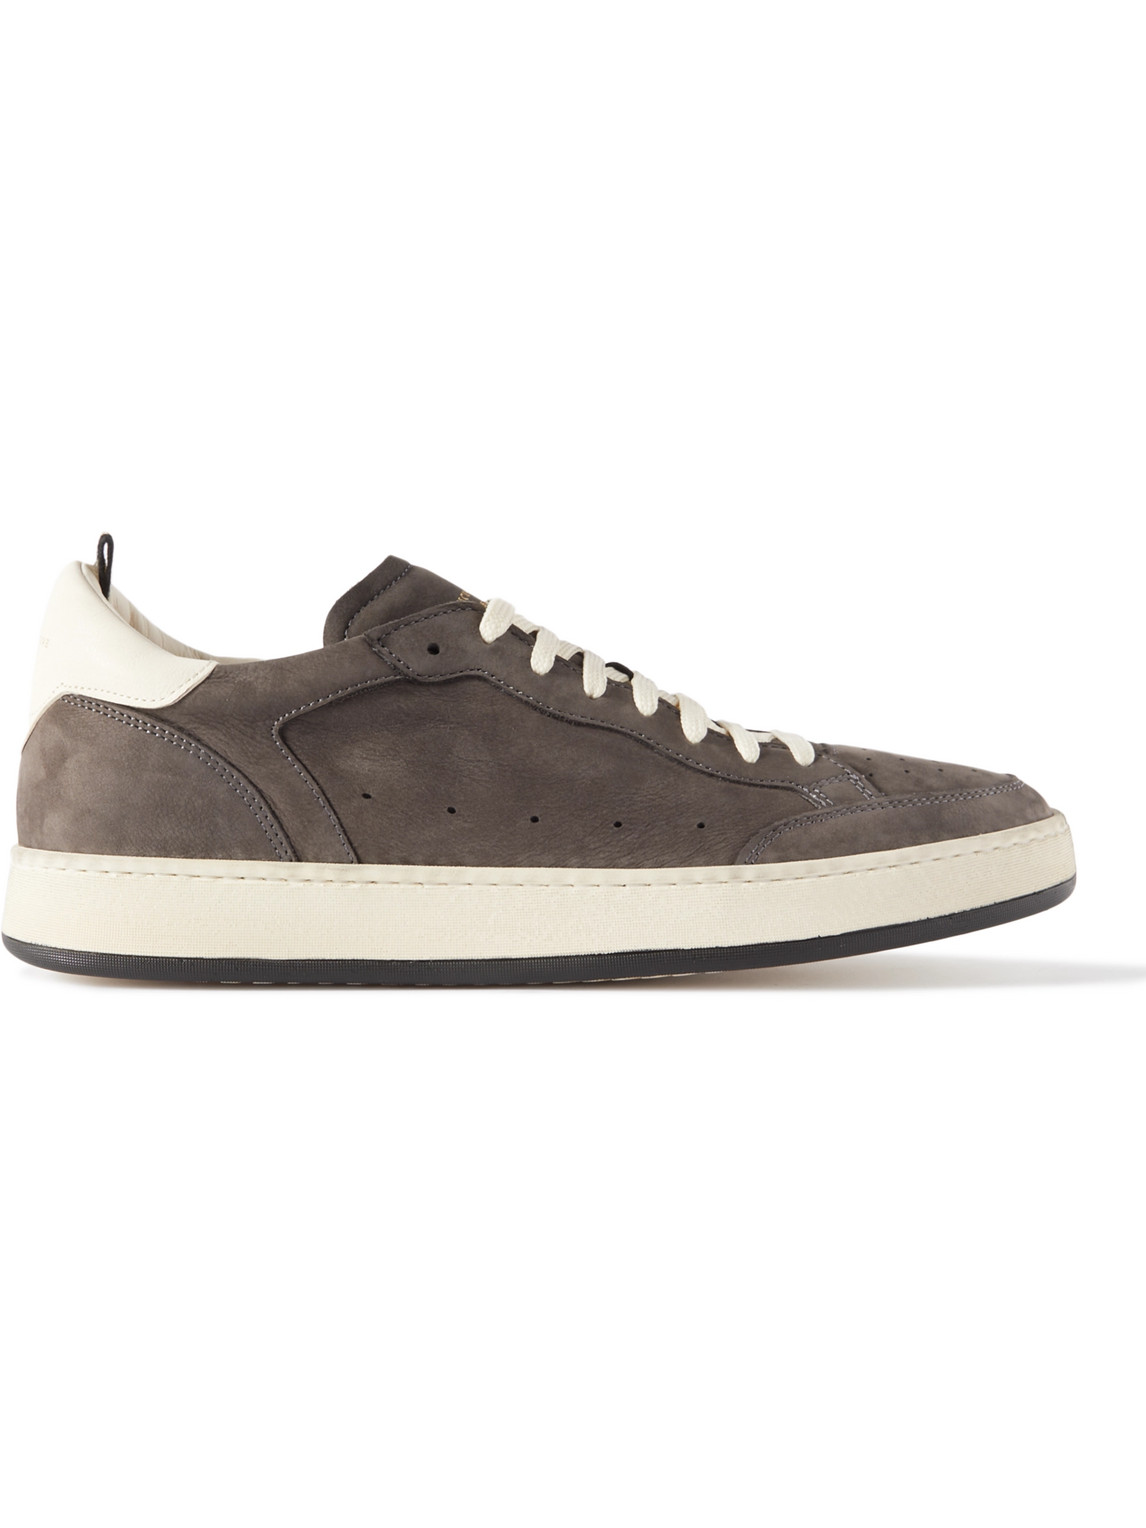 OFFICINE CREATIVE MAGIC 002 LEATHER-TRIMMED NUBUCK SNEAKERS